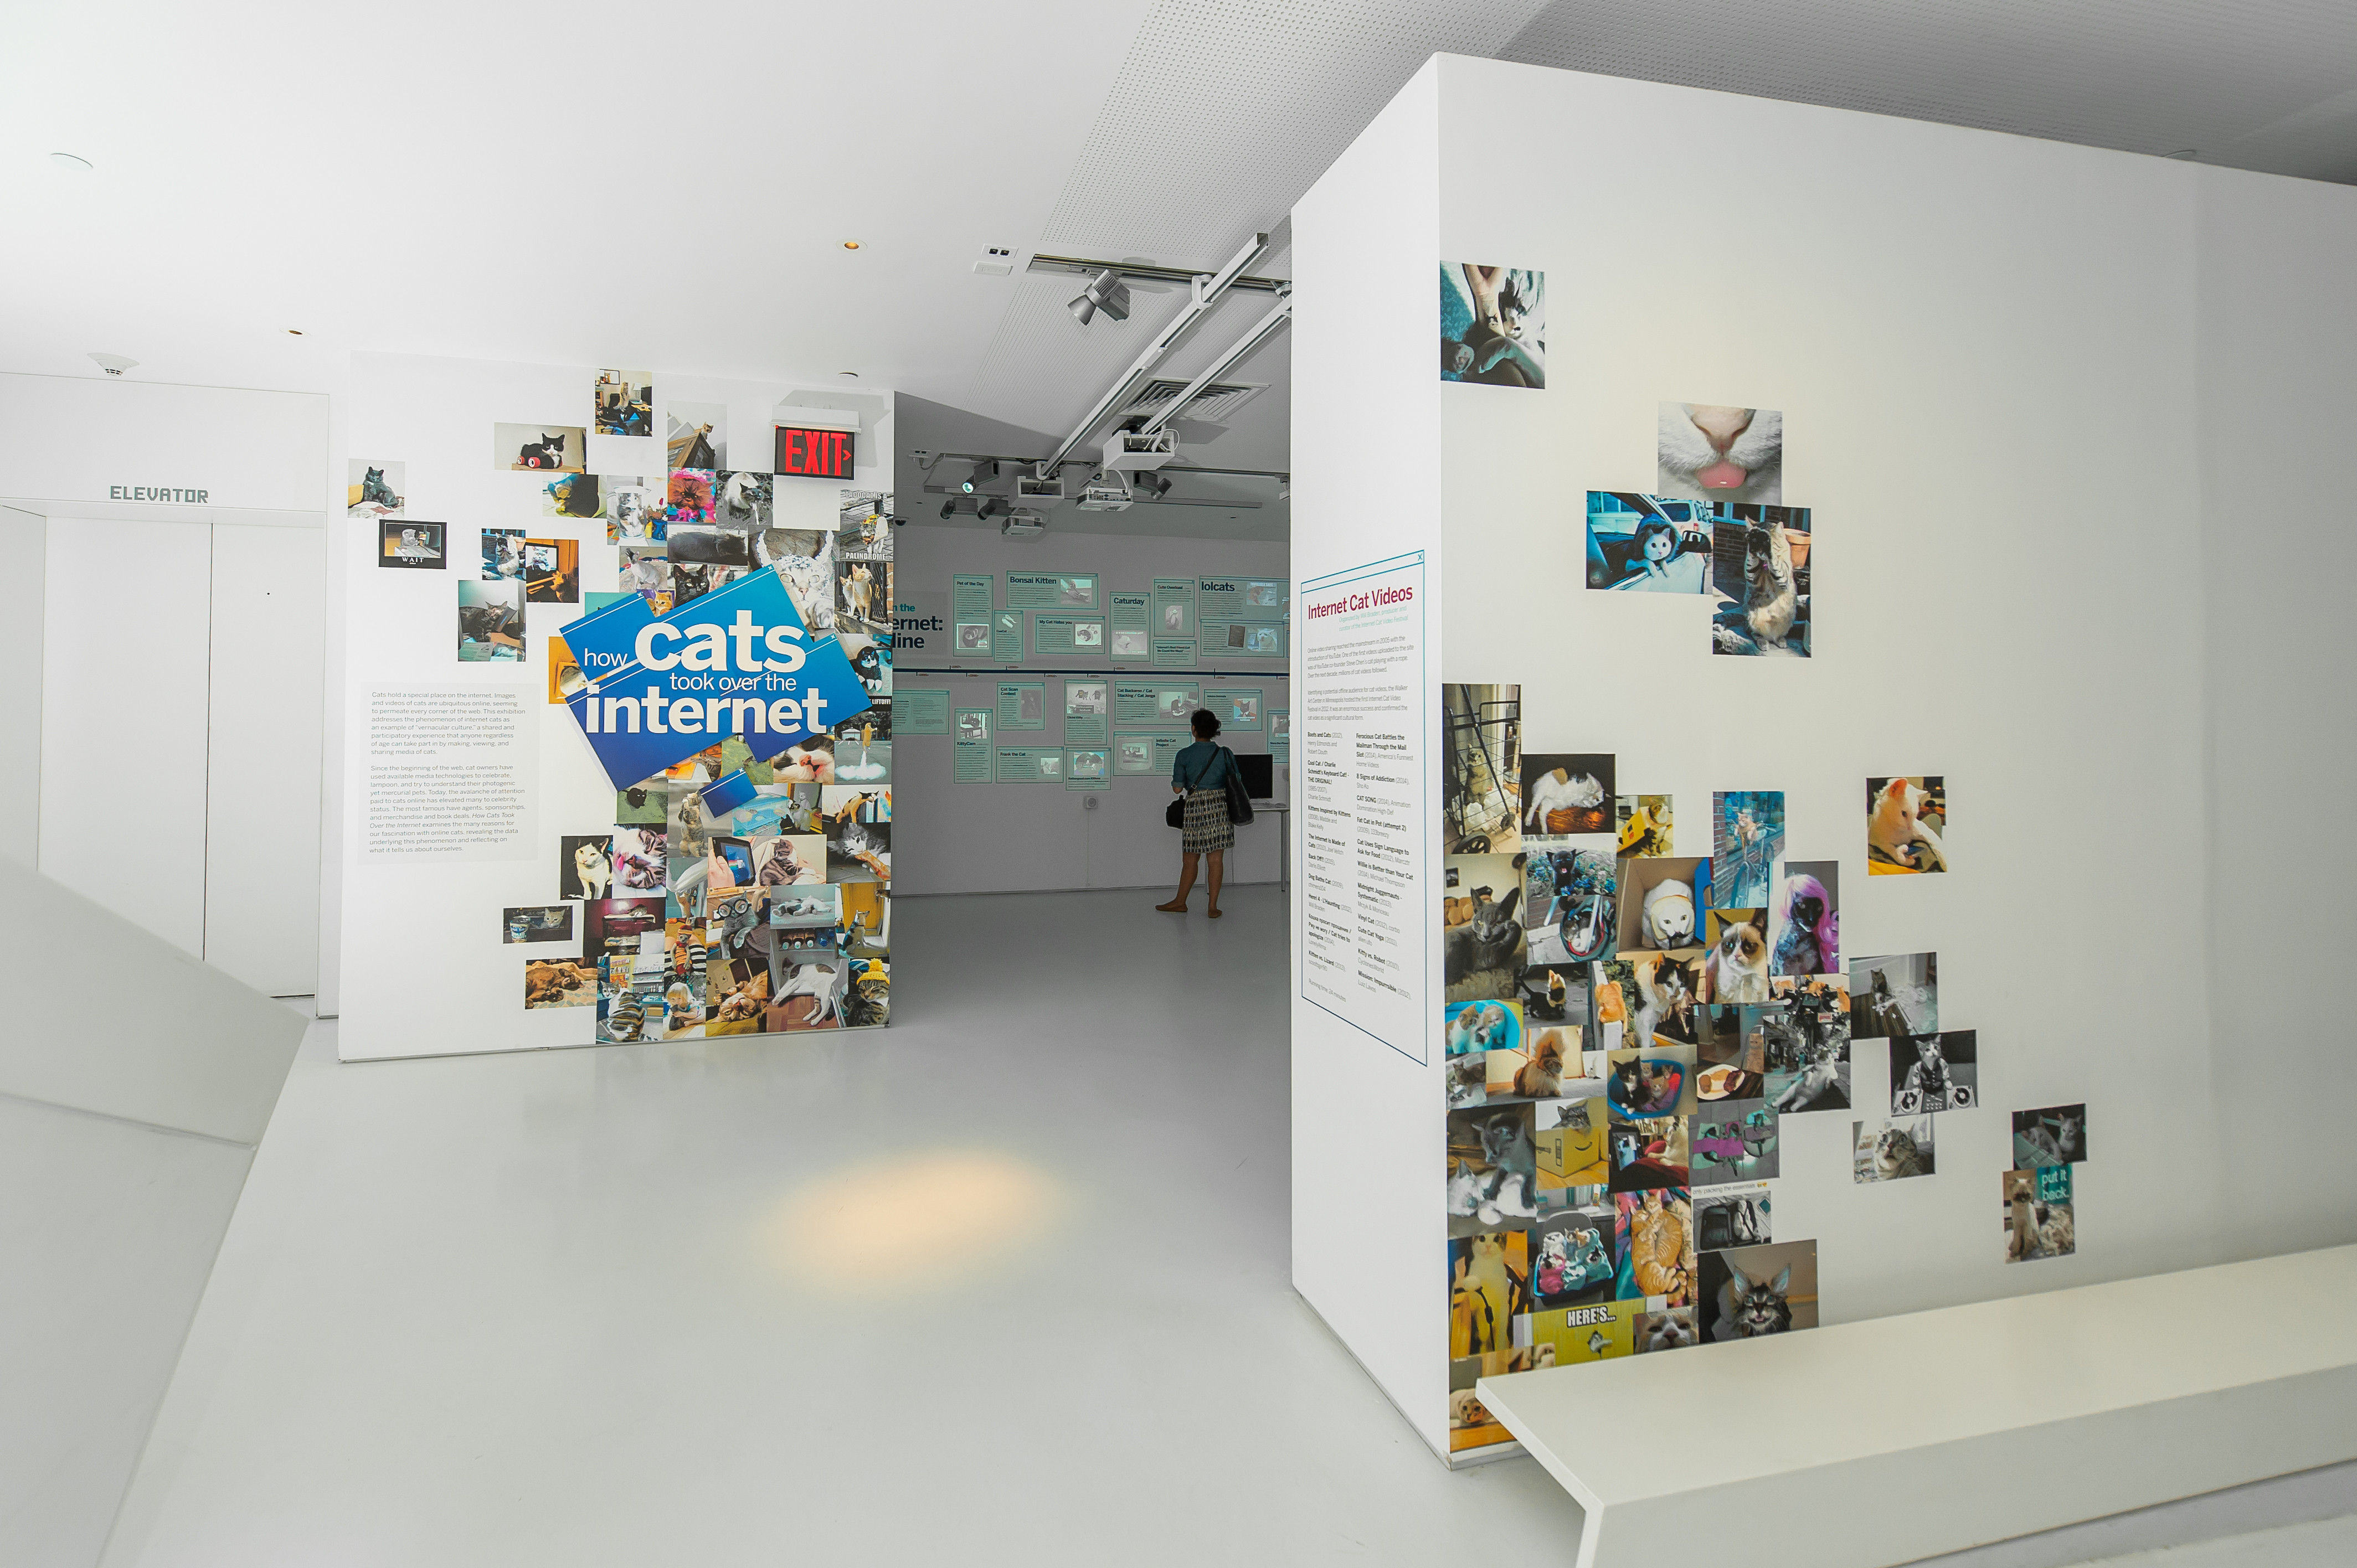 The "How Cats Took Over the Internet" exhibit at the Museum of the Moving Image in Queens, New York. (Thanassi Karageorgiou / Museum of the Moving Image)